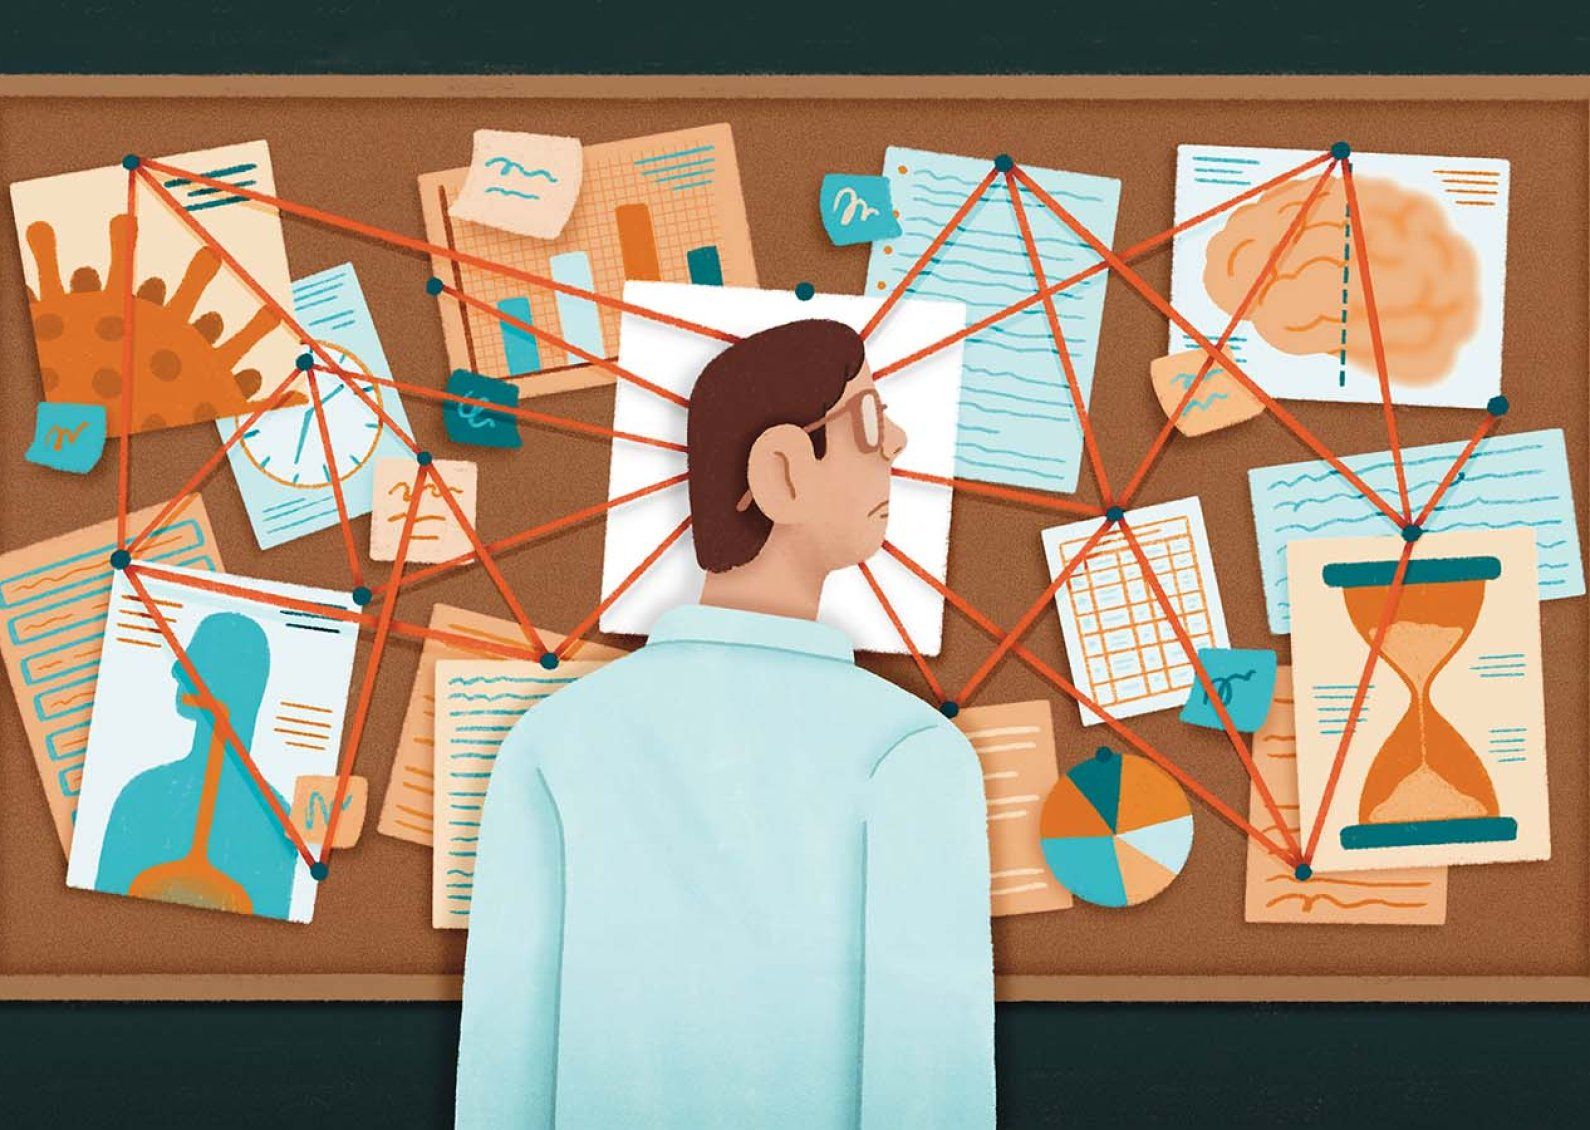 Illustration of a man looking at a cork board with papers of text, images, charts, and graphs with red string connecting them.